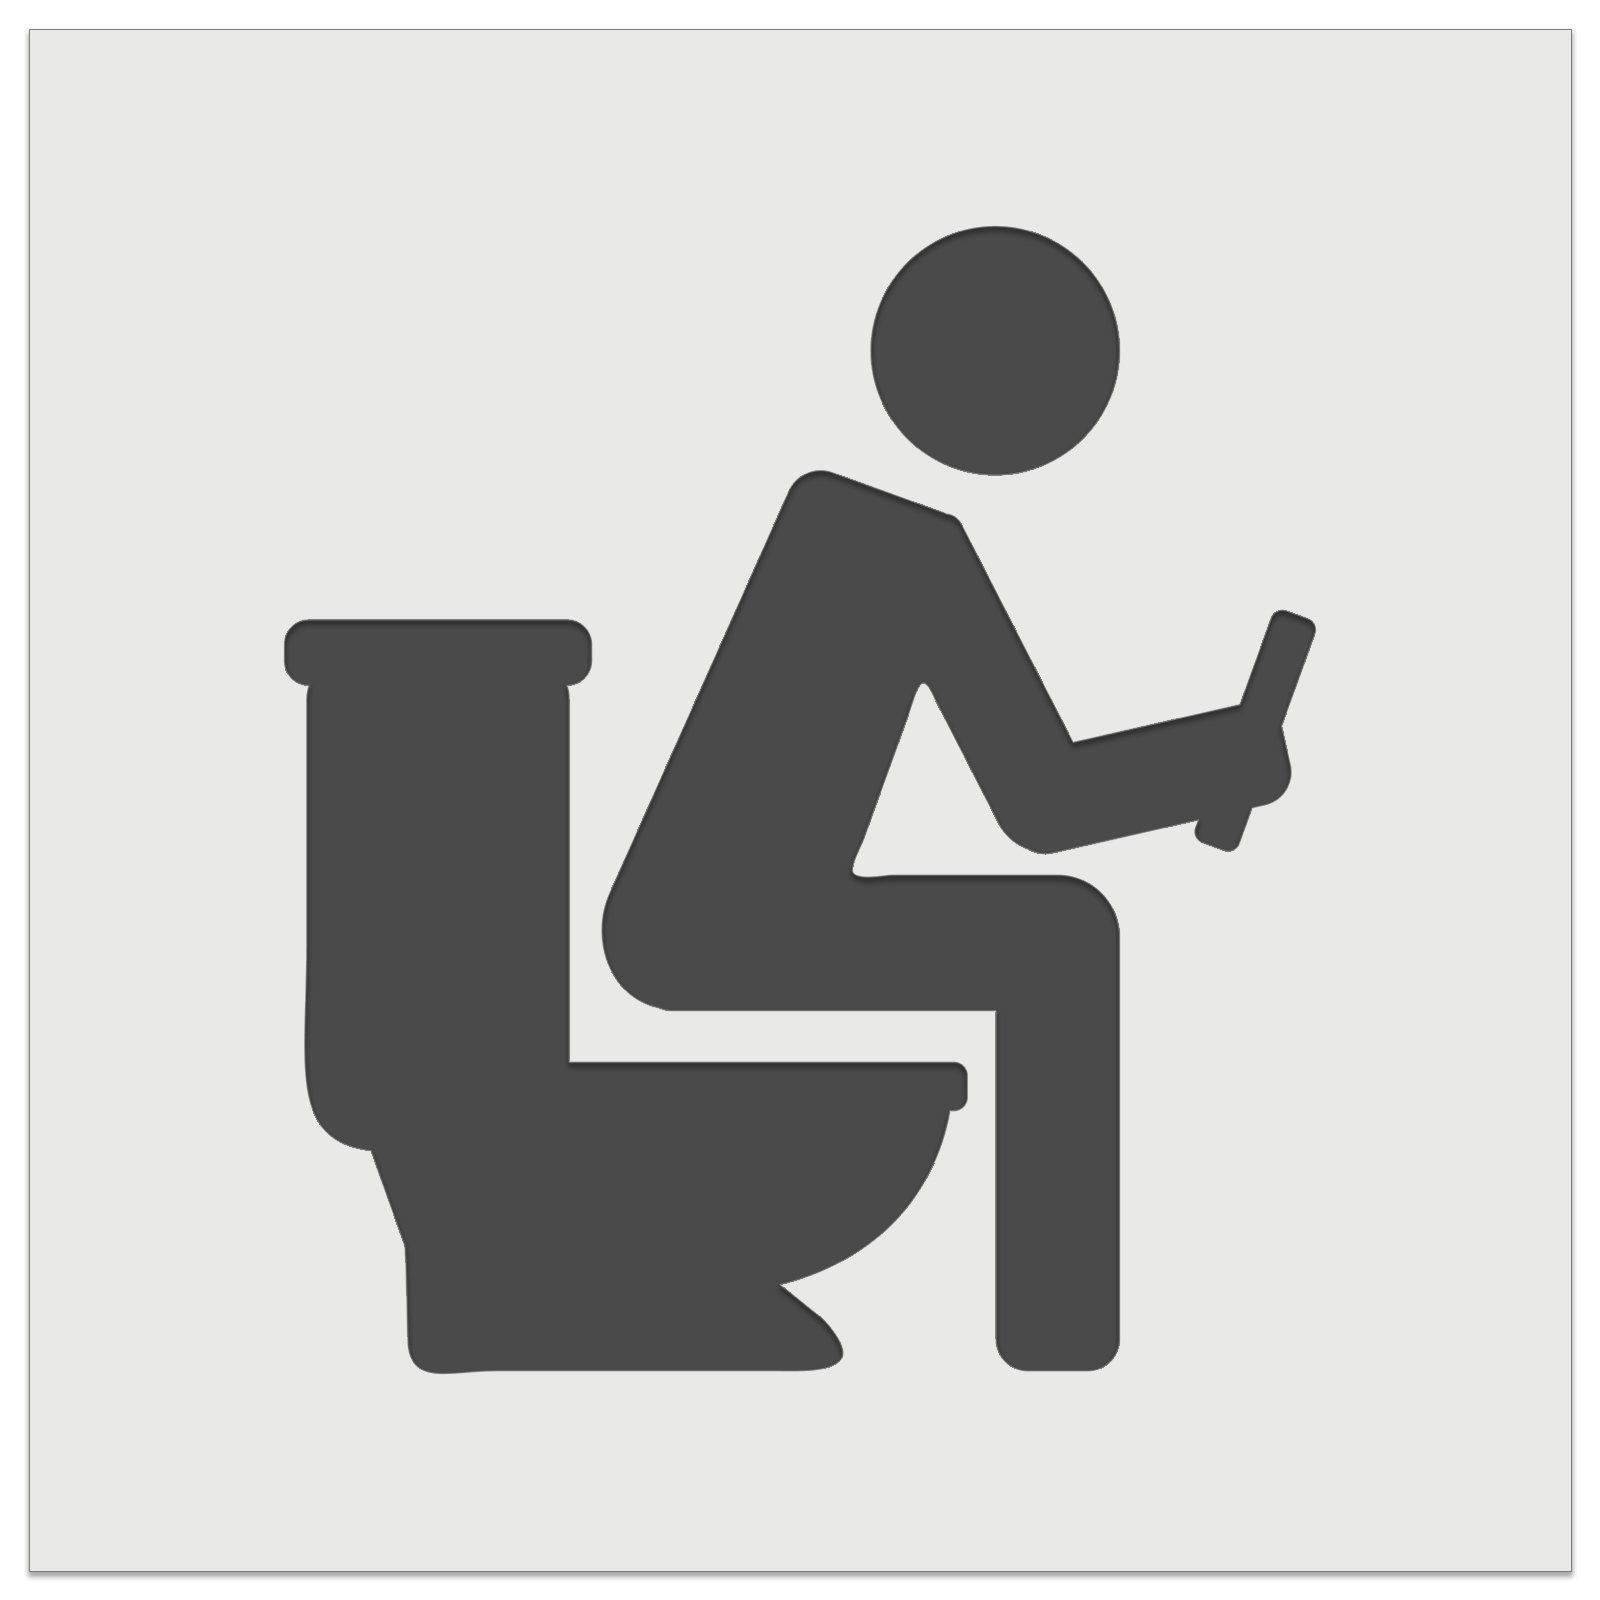 Person Sitting on Toilet With Phone Restroom Pooping Wall